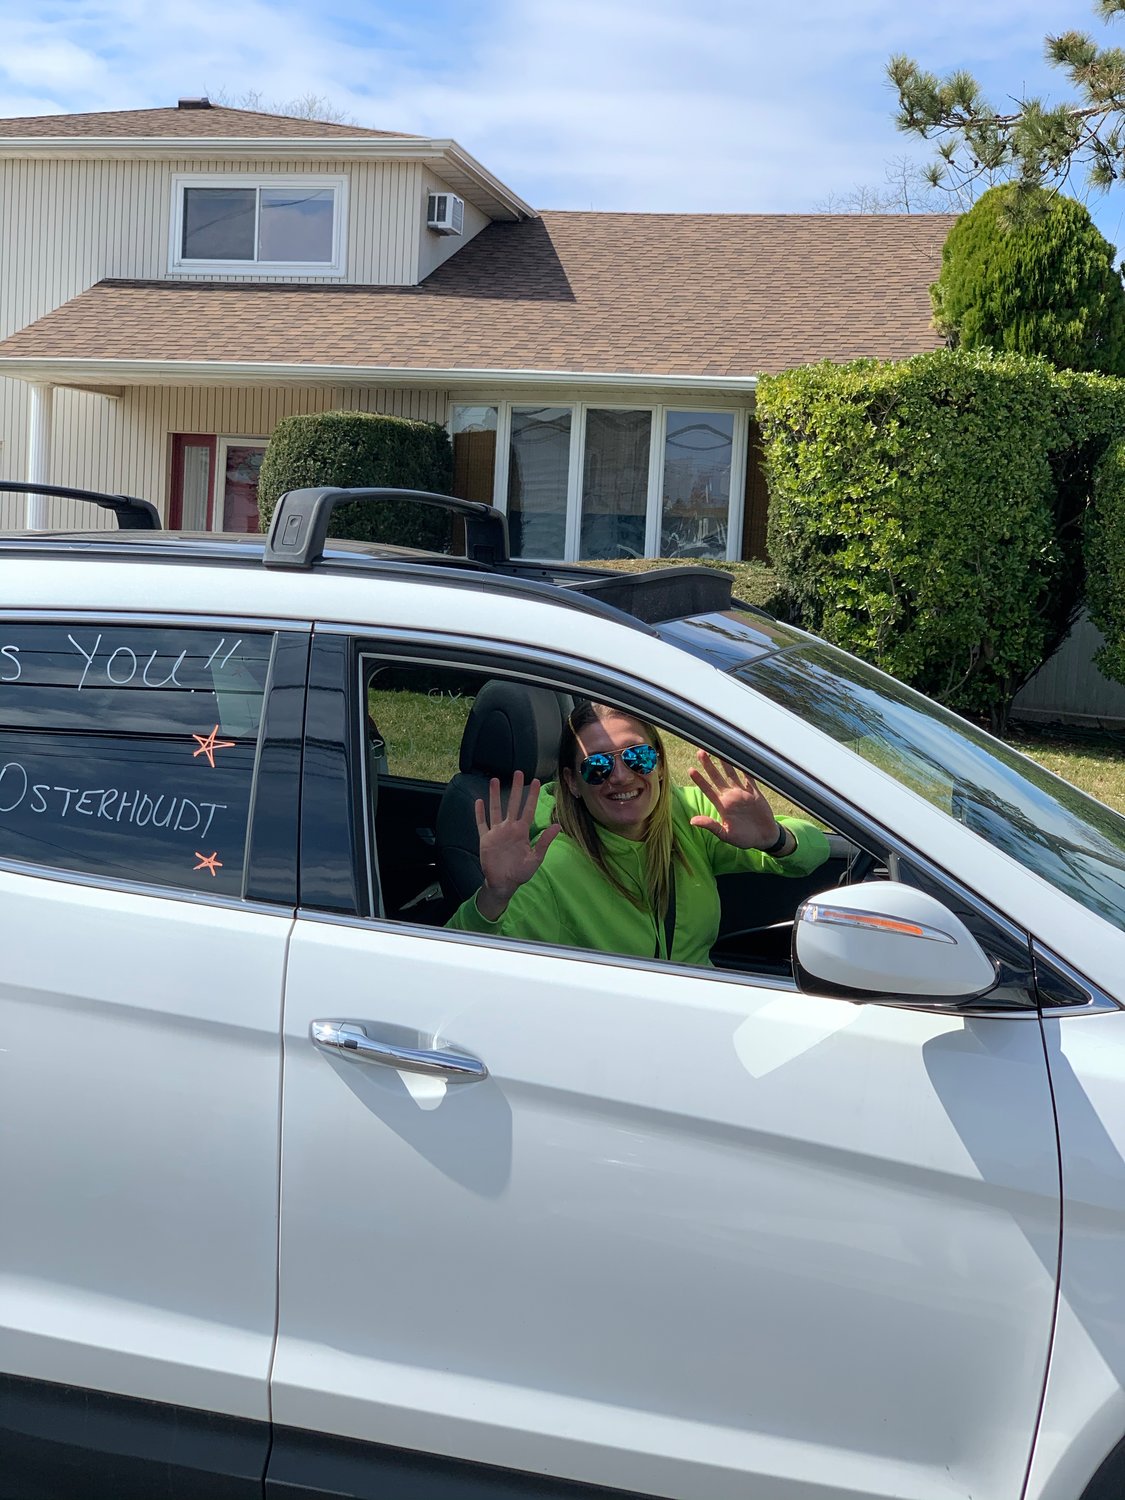 Shore Road School fifth-grade teacher Nicole Osterhoudt waved to her students from the safety of her car.